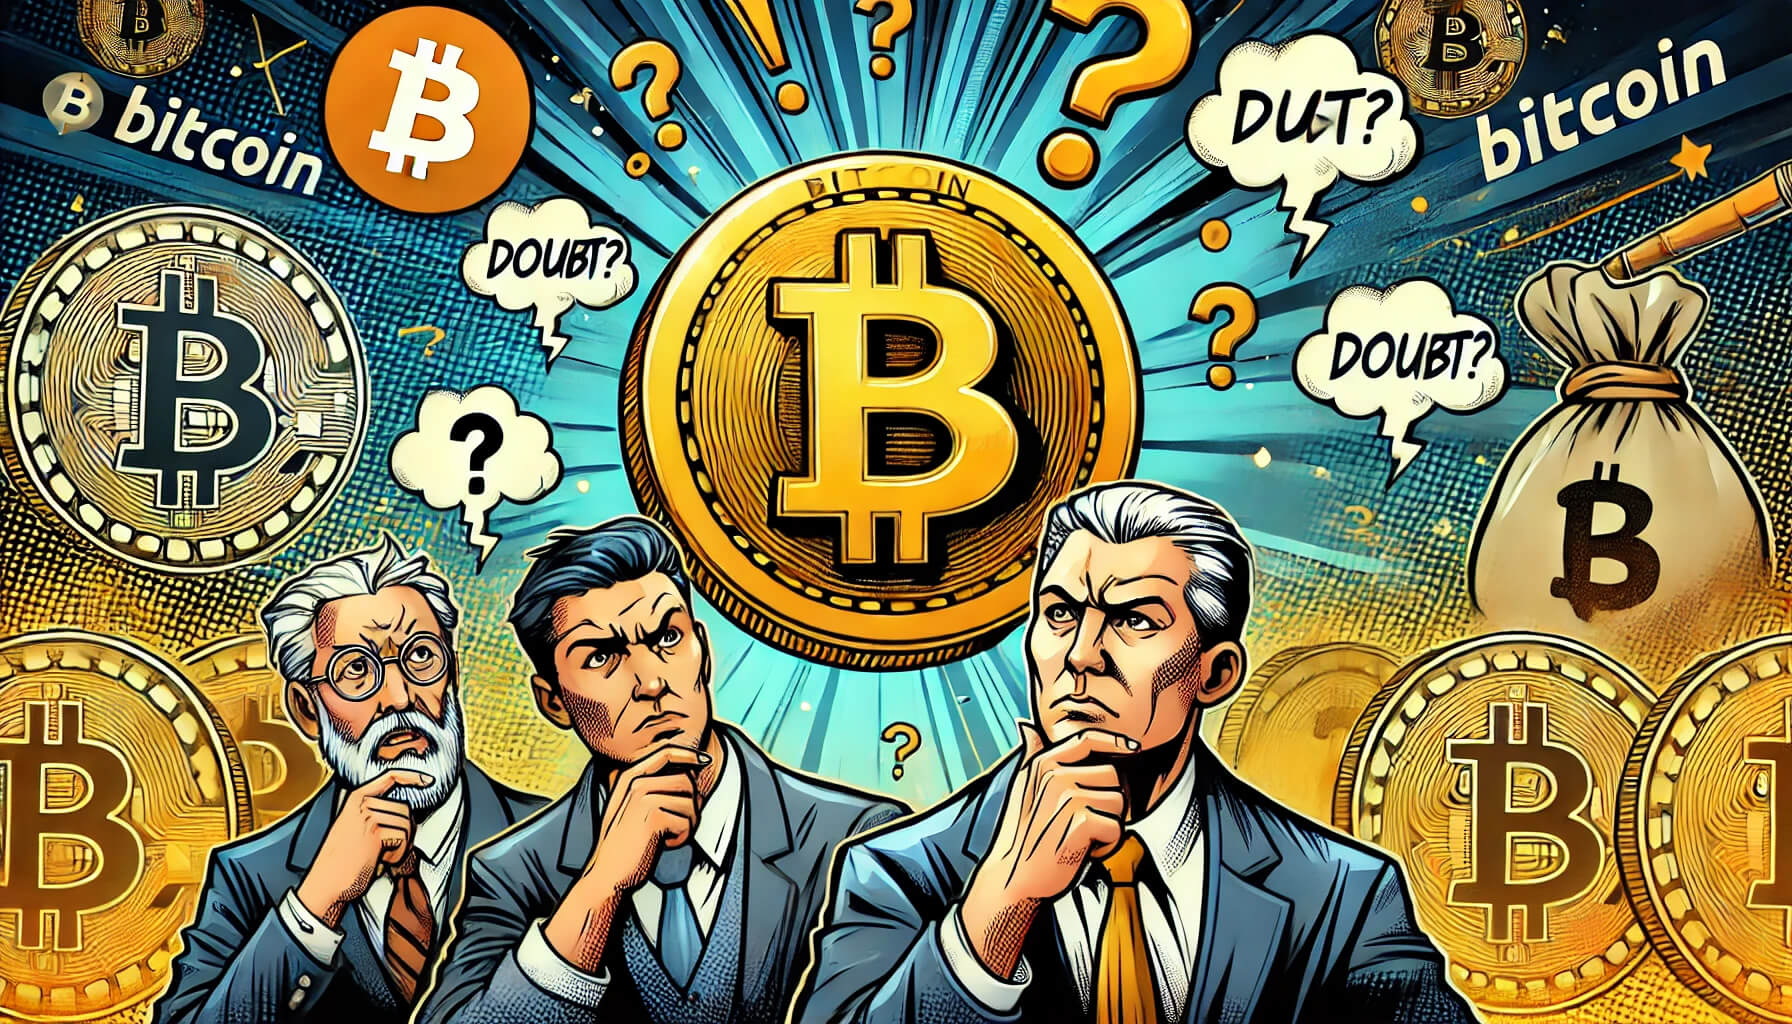 Bitcoin Faces Increased Market Volatility and Investor Skepticism